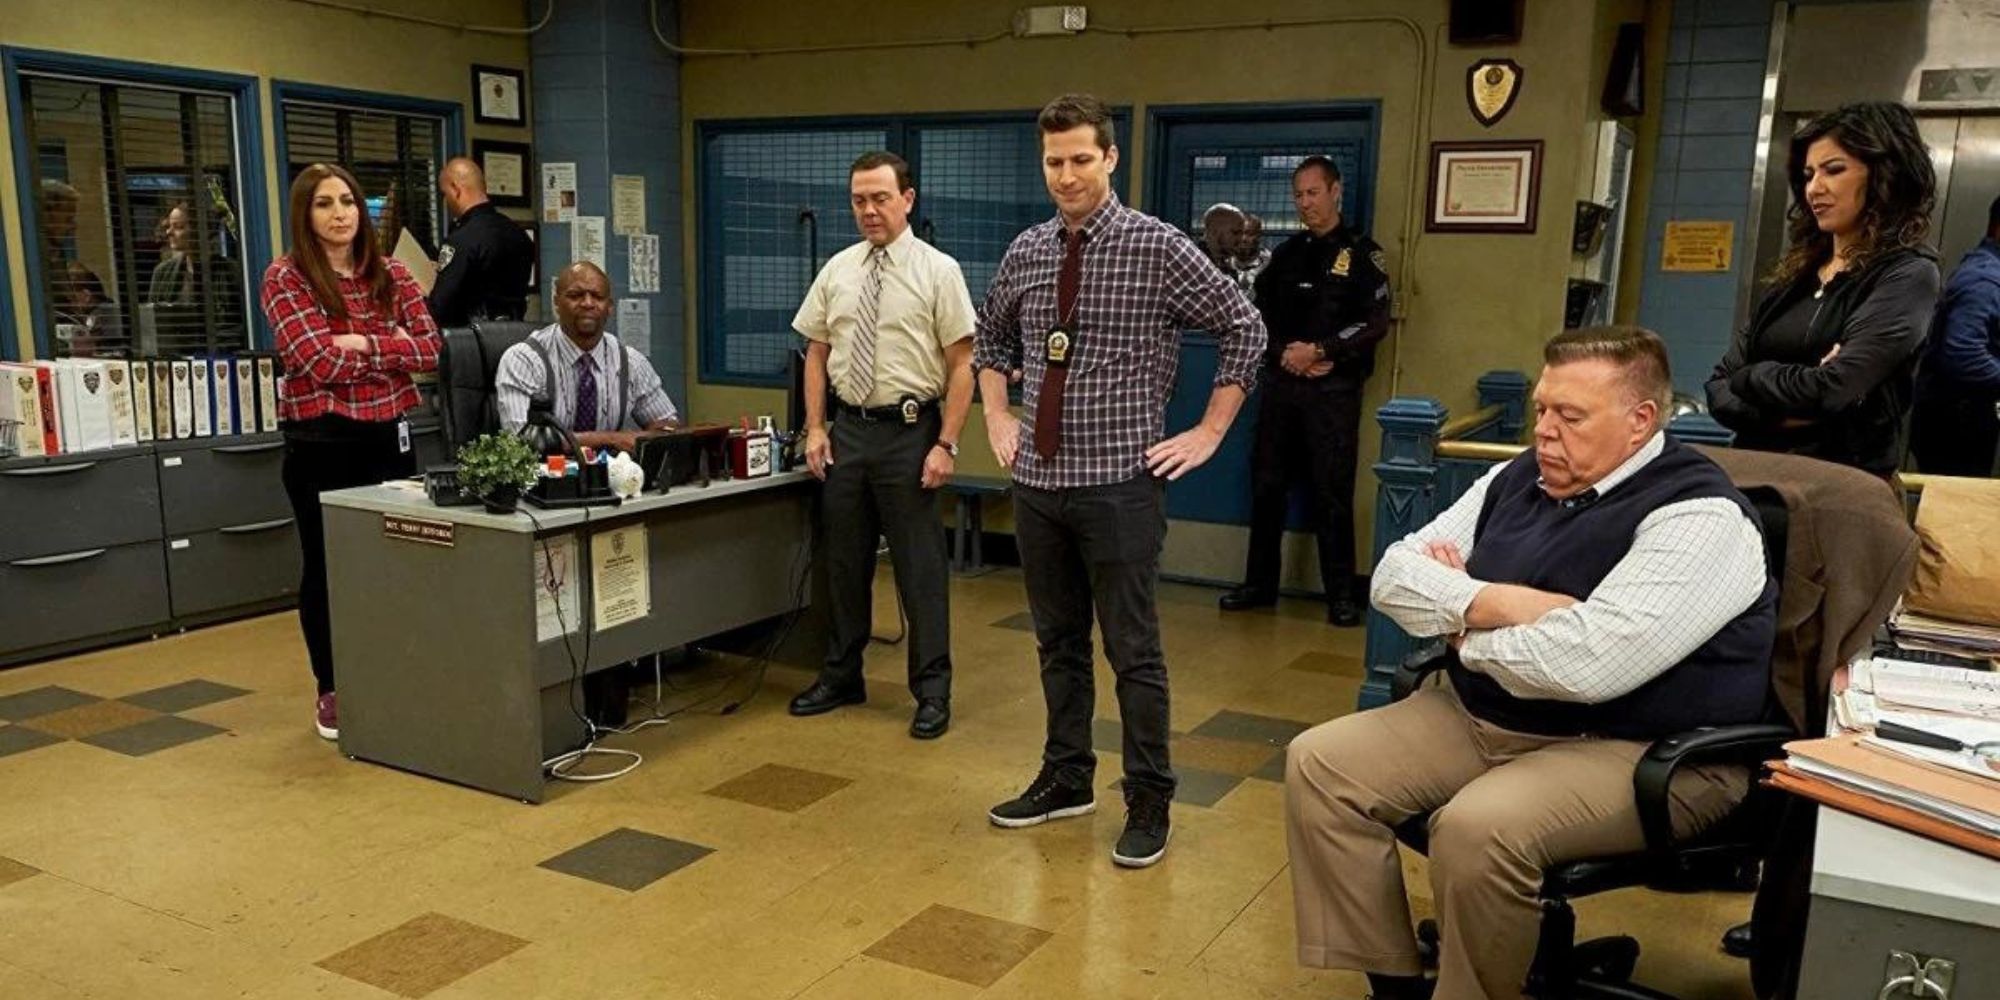 (L-R) Gina, Terry, Boyle, Jake, and Scully from Brooklyn Nine-Nine standing in the bullpen